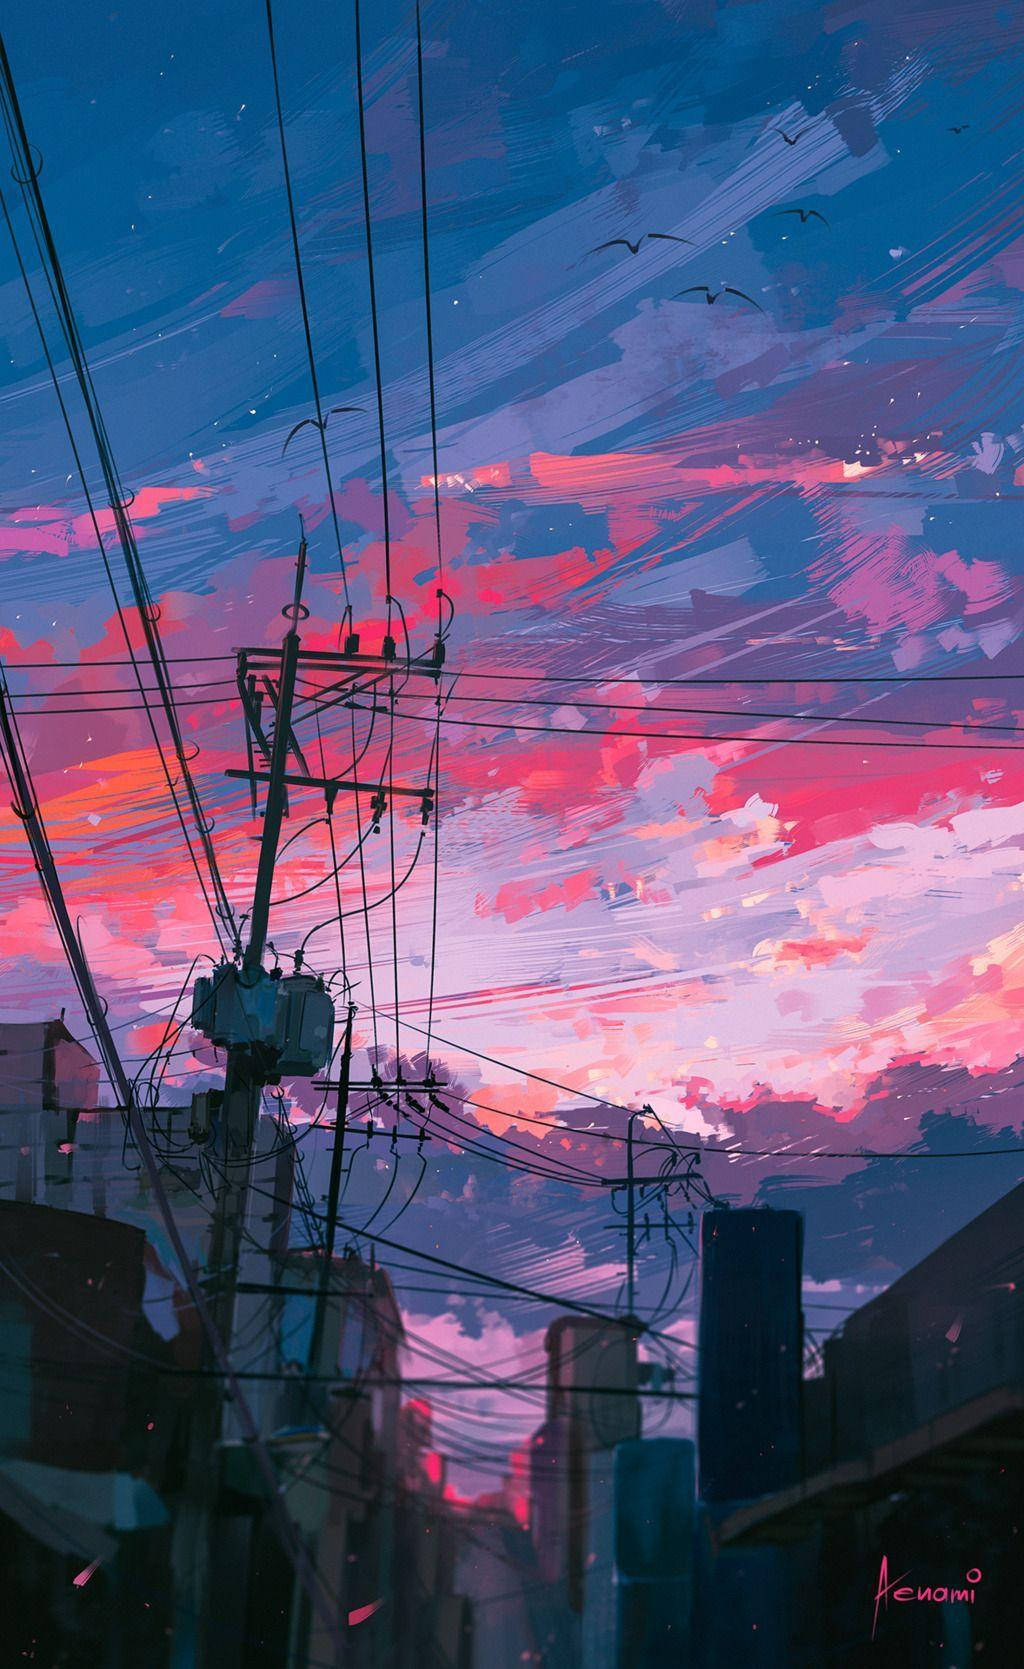 Aesthetic City With Electrical Wires Background